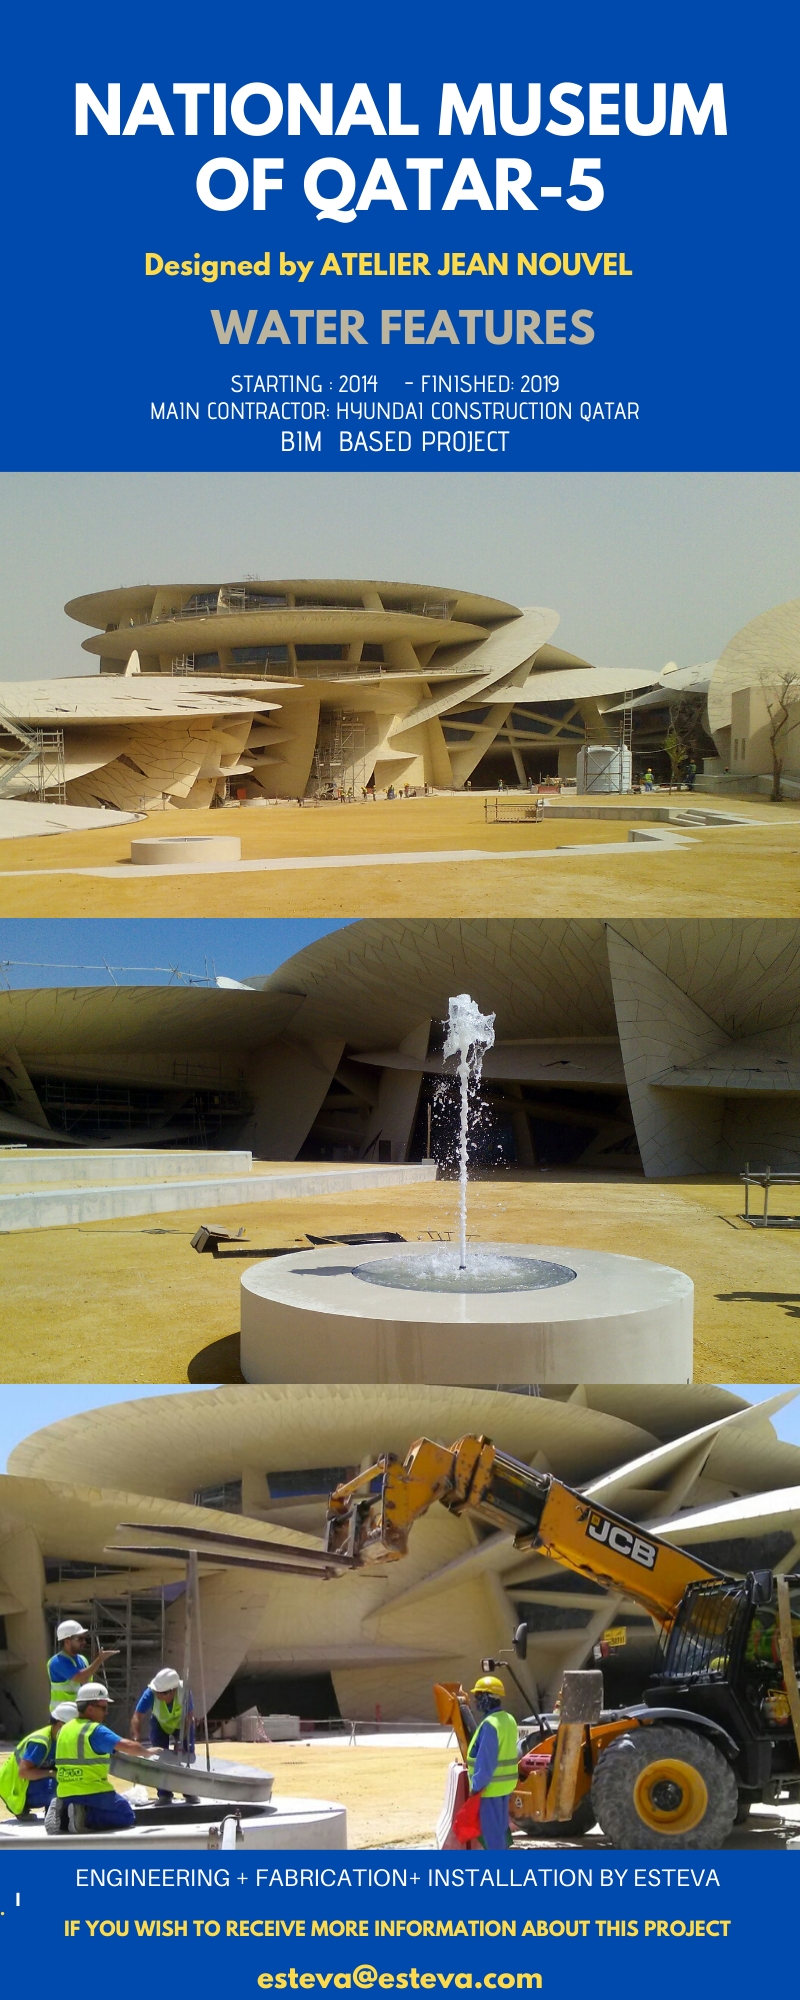 NATIONAL MUSEUM OF QATAR WATERFEATURES